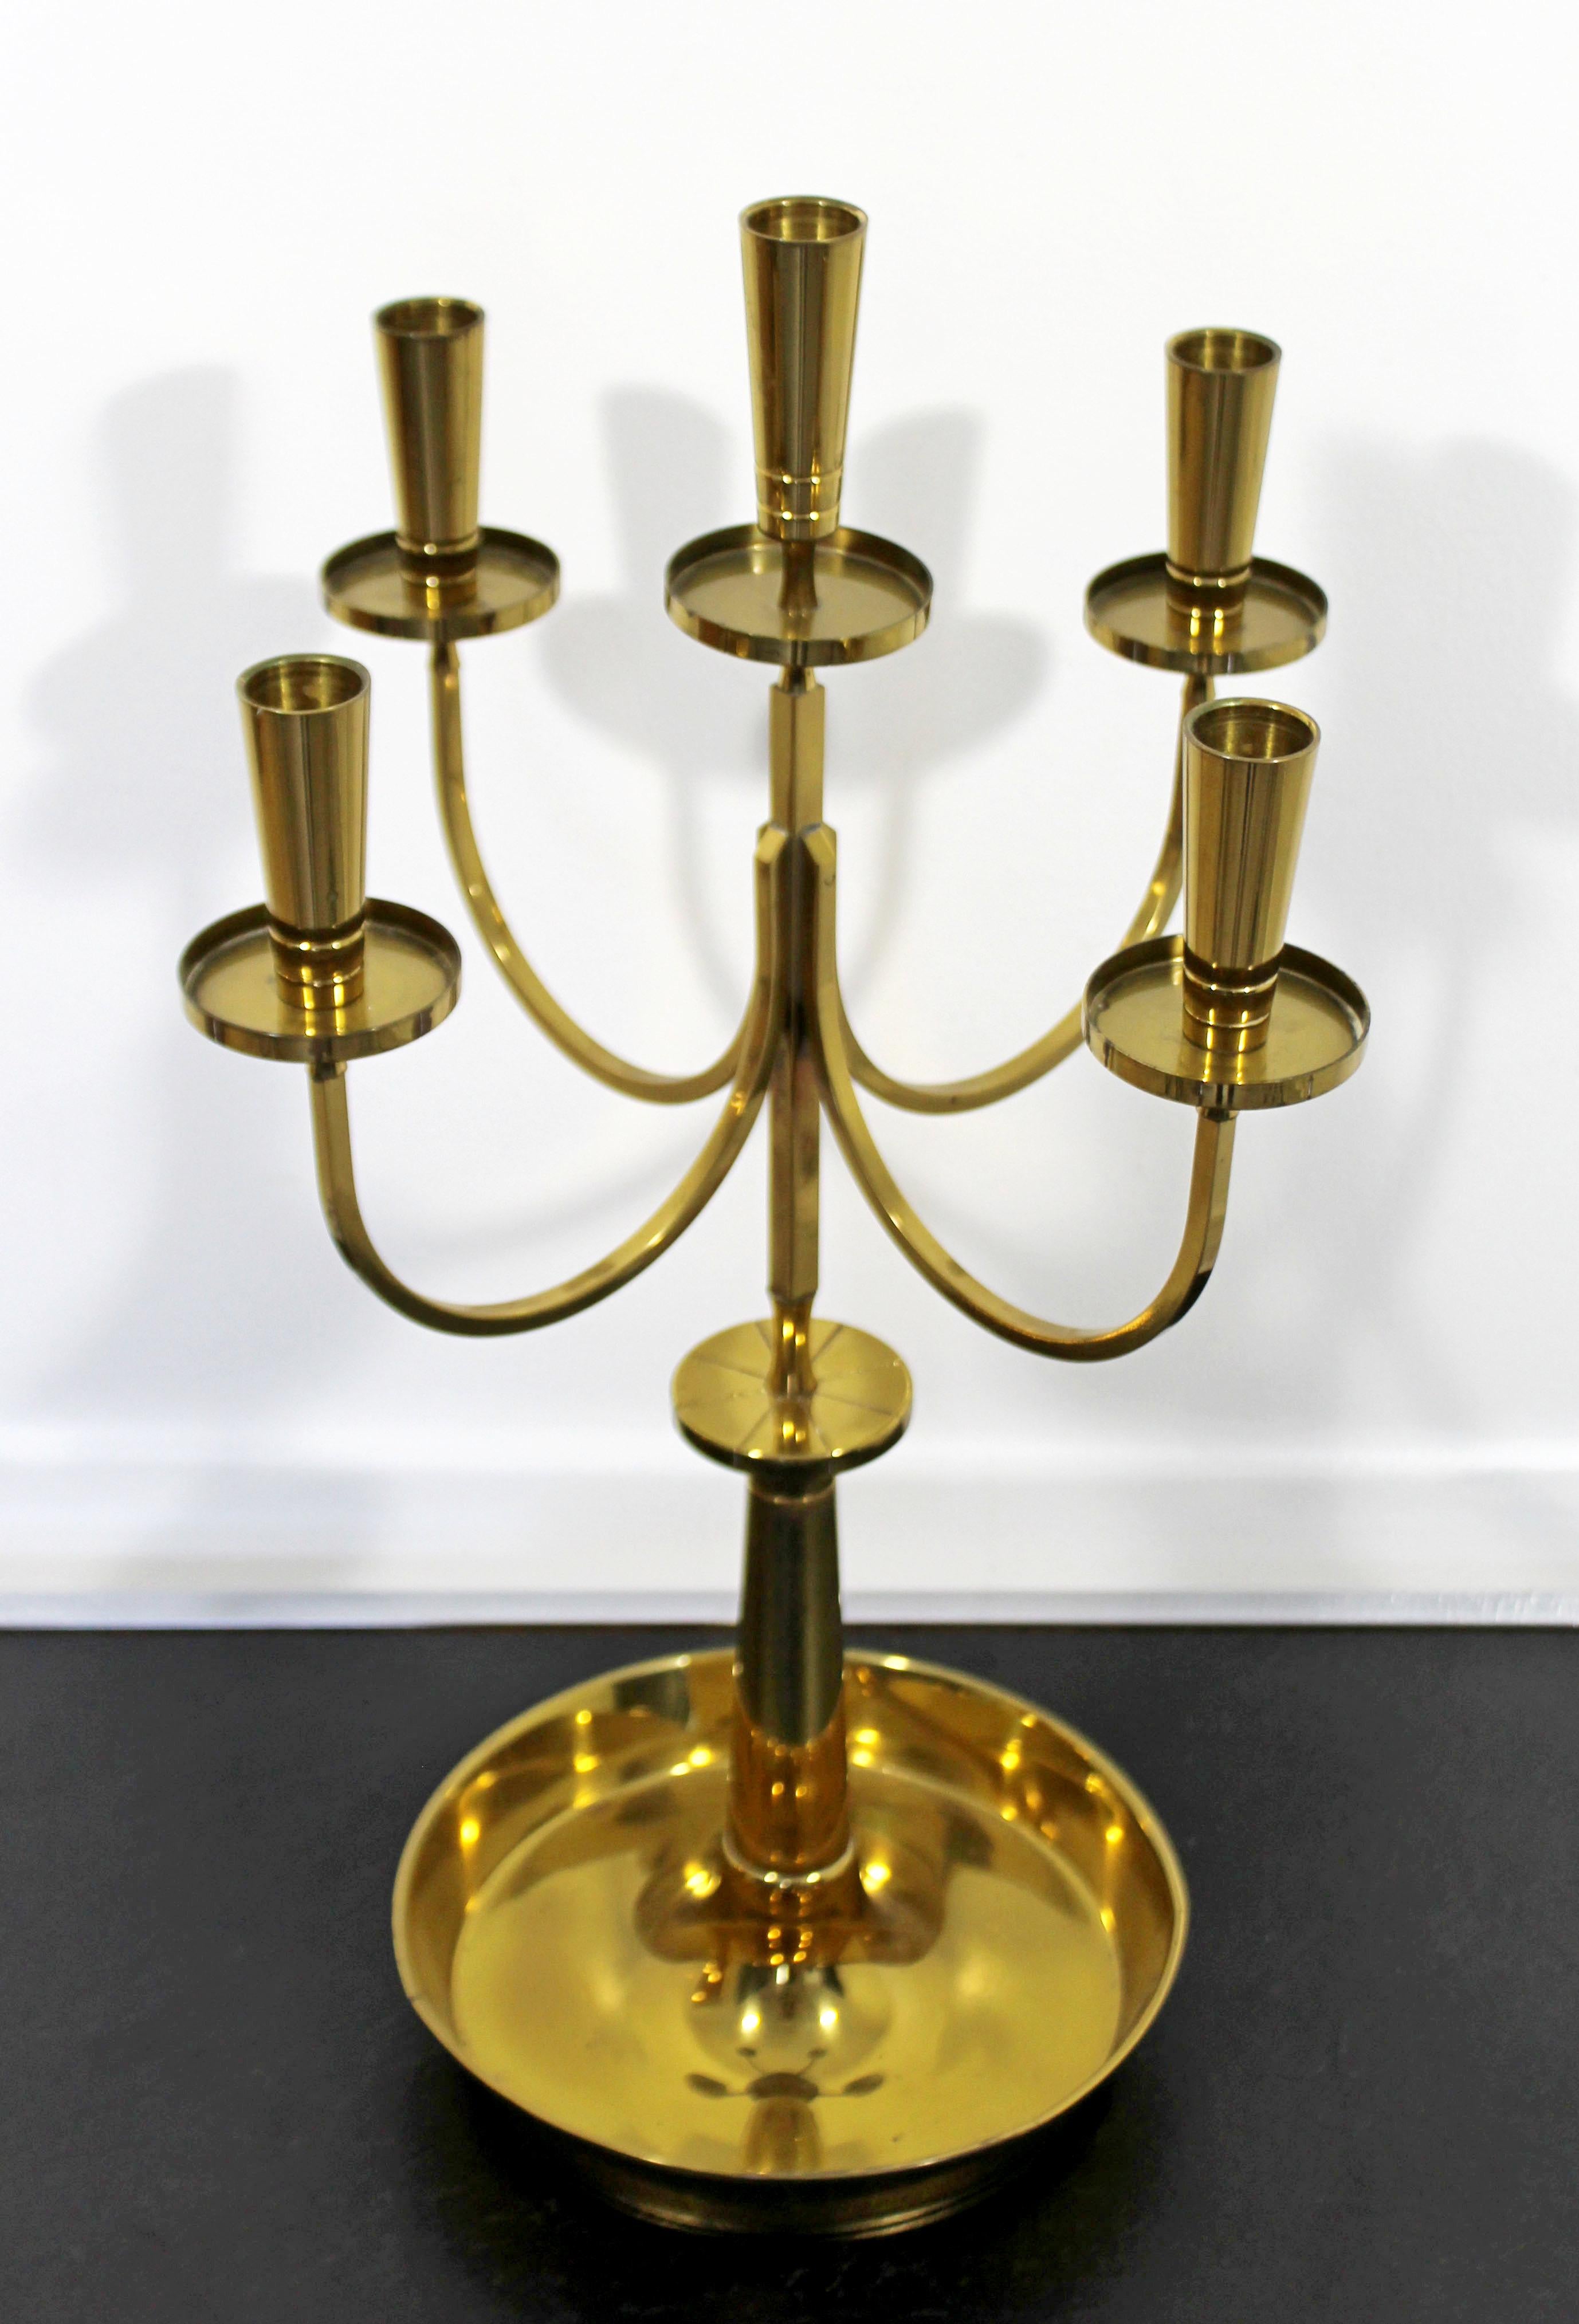 For your consideration is a magnificent, five-arm candelabra, made of polished brass, by Tommi Parzinger for Dorlyn, circa the 1950s. The dimensions are 13